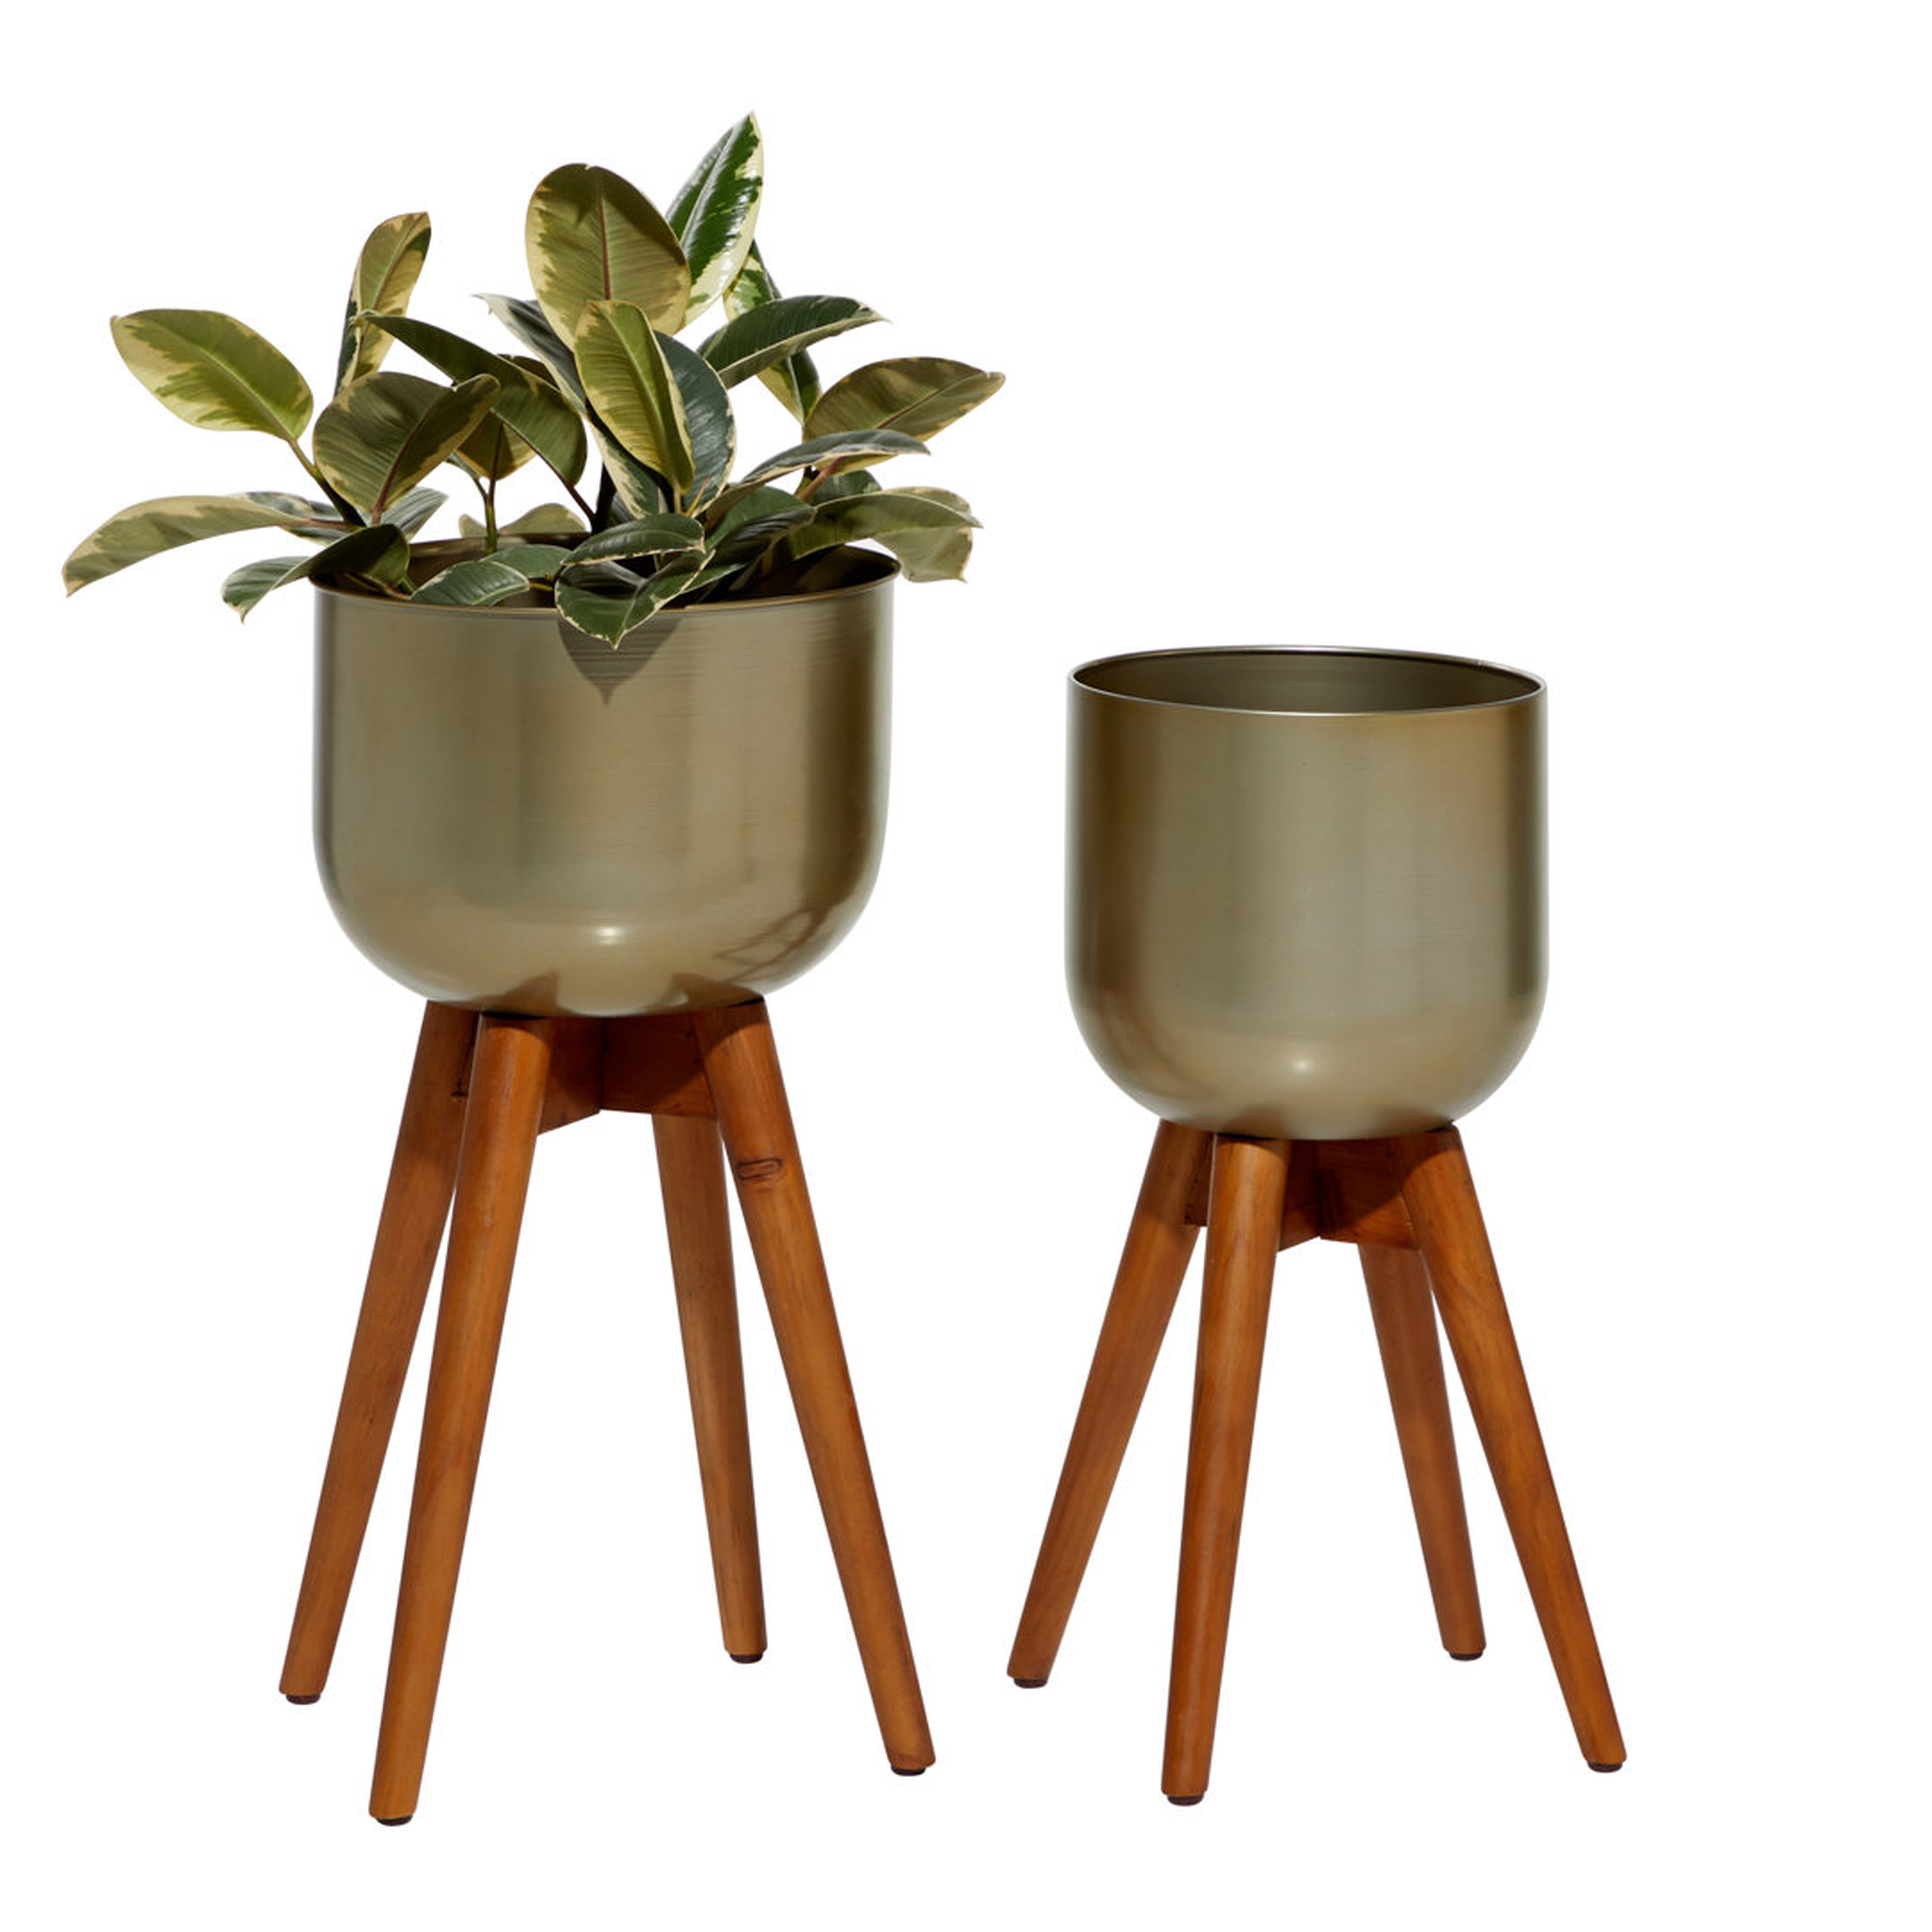 "Cole & Grey Gold Metal Planters With Wood Base, Set Of 2: 21"" X 24""" - Perigold